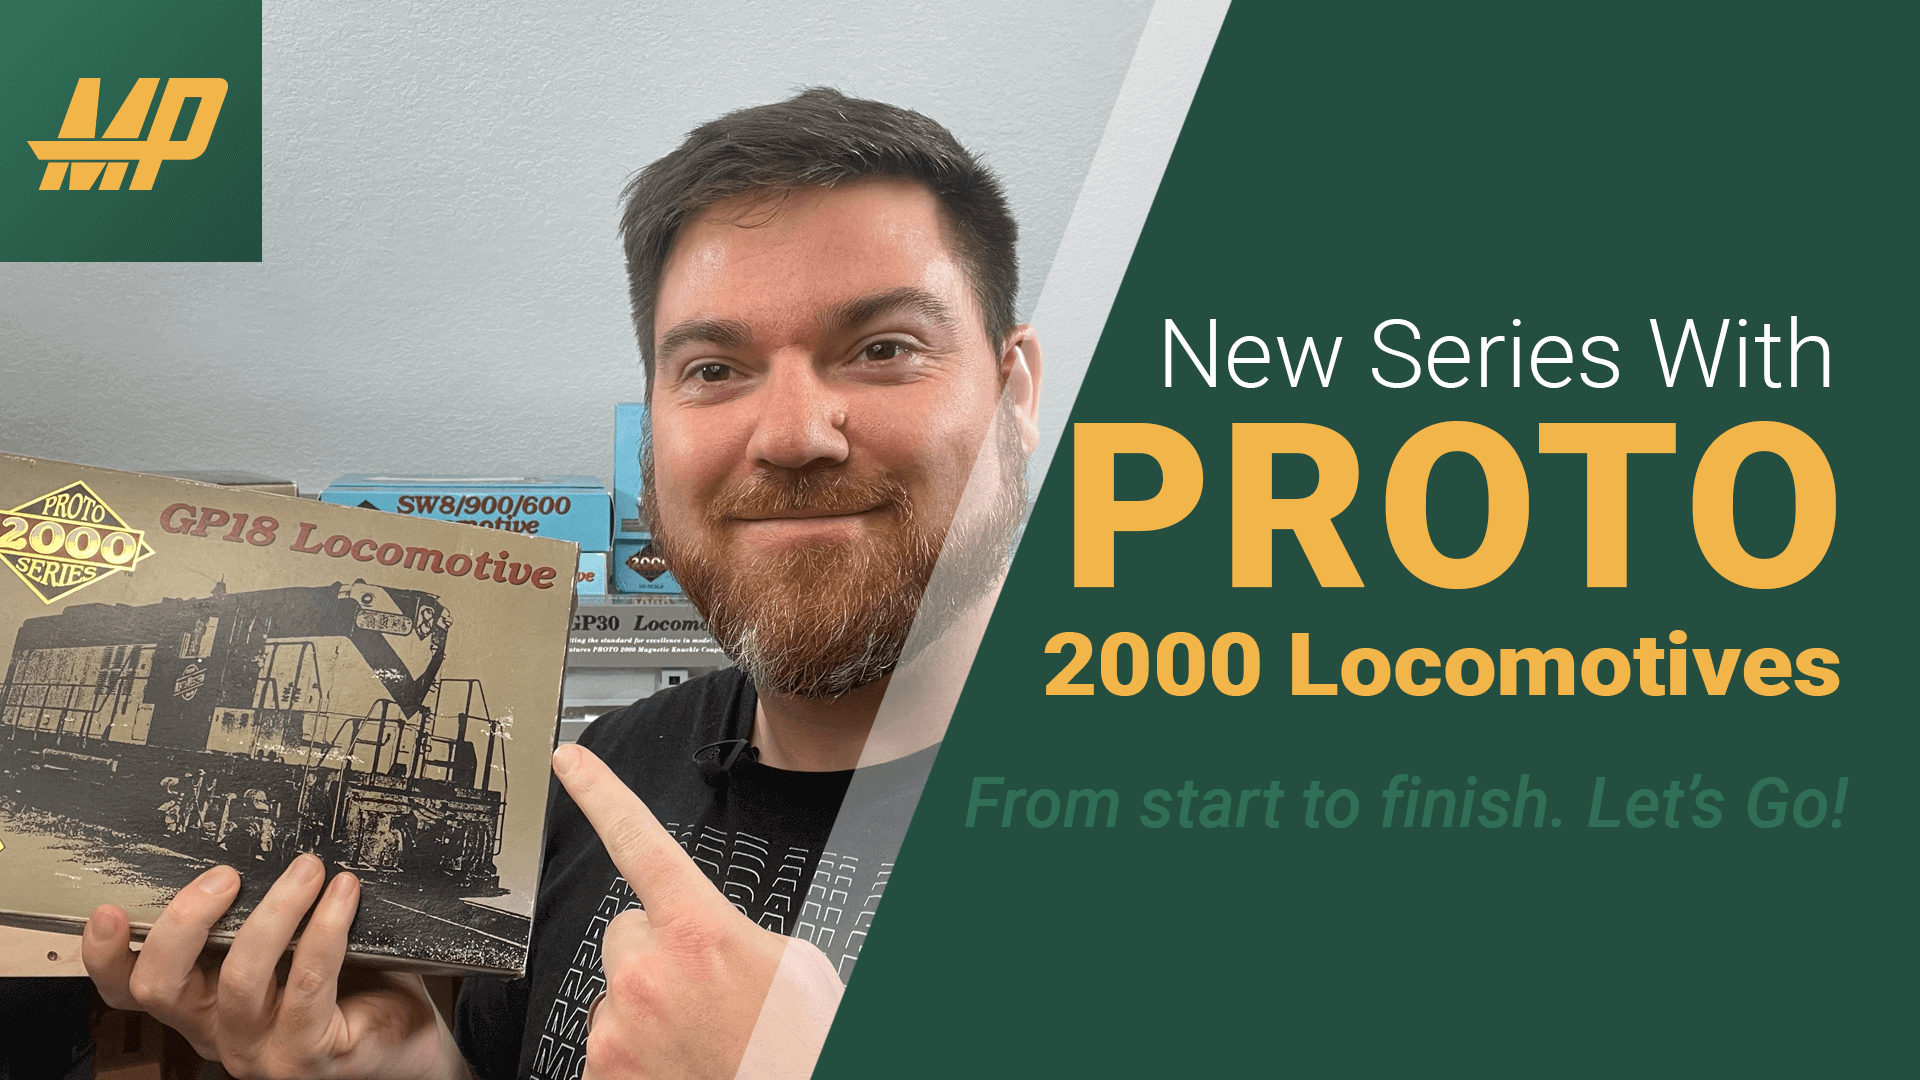 Let’s start a new Proto 2000 Locomotive Video Series